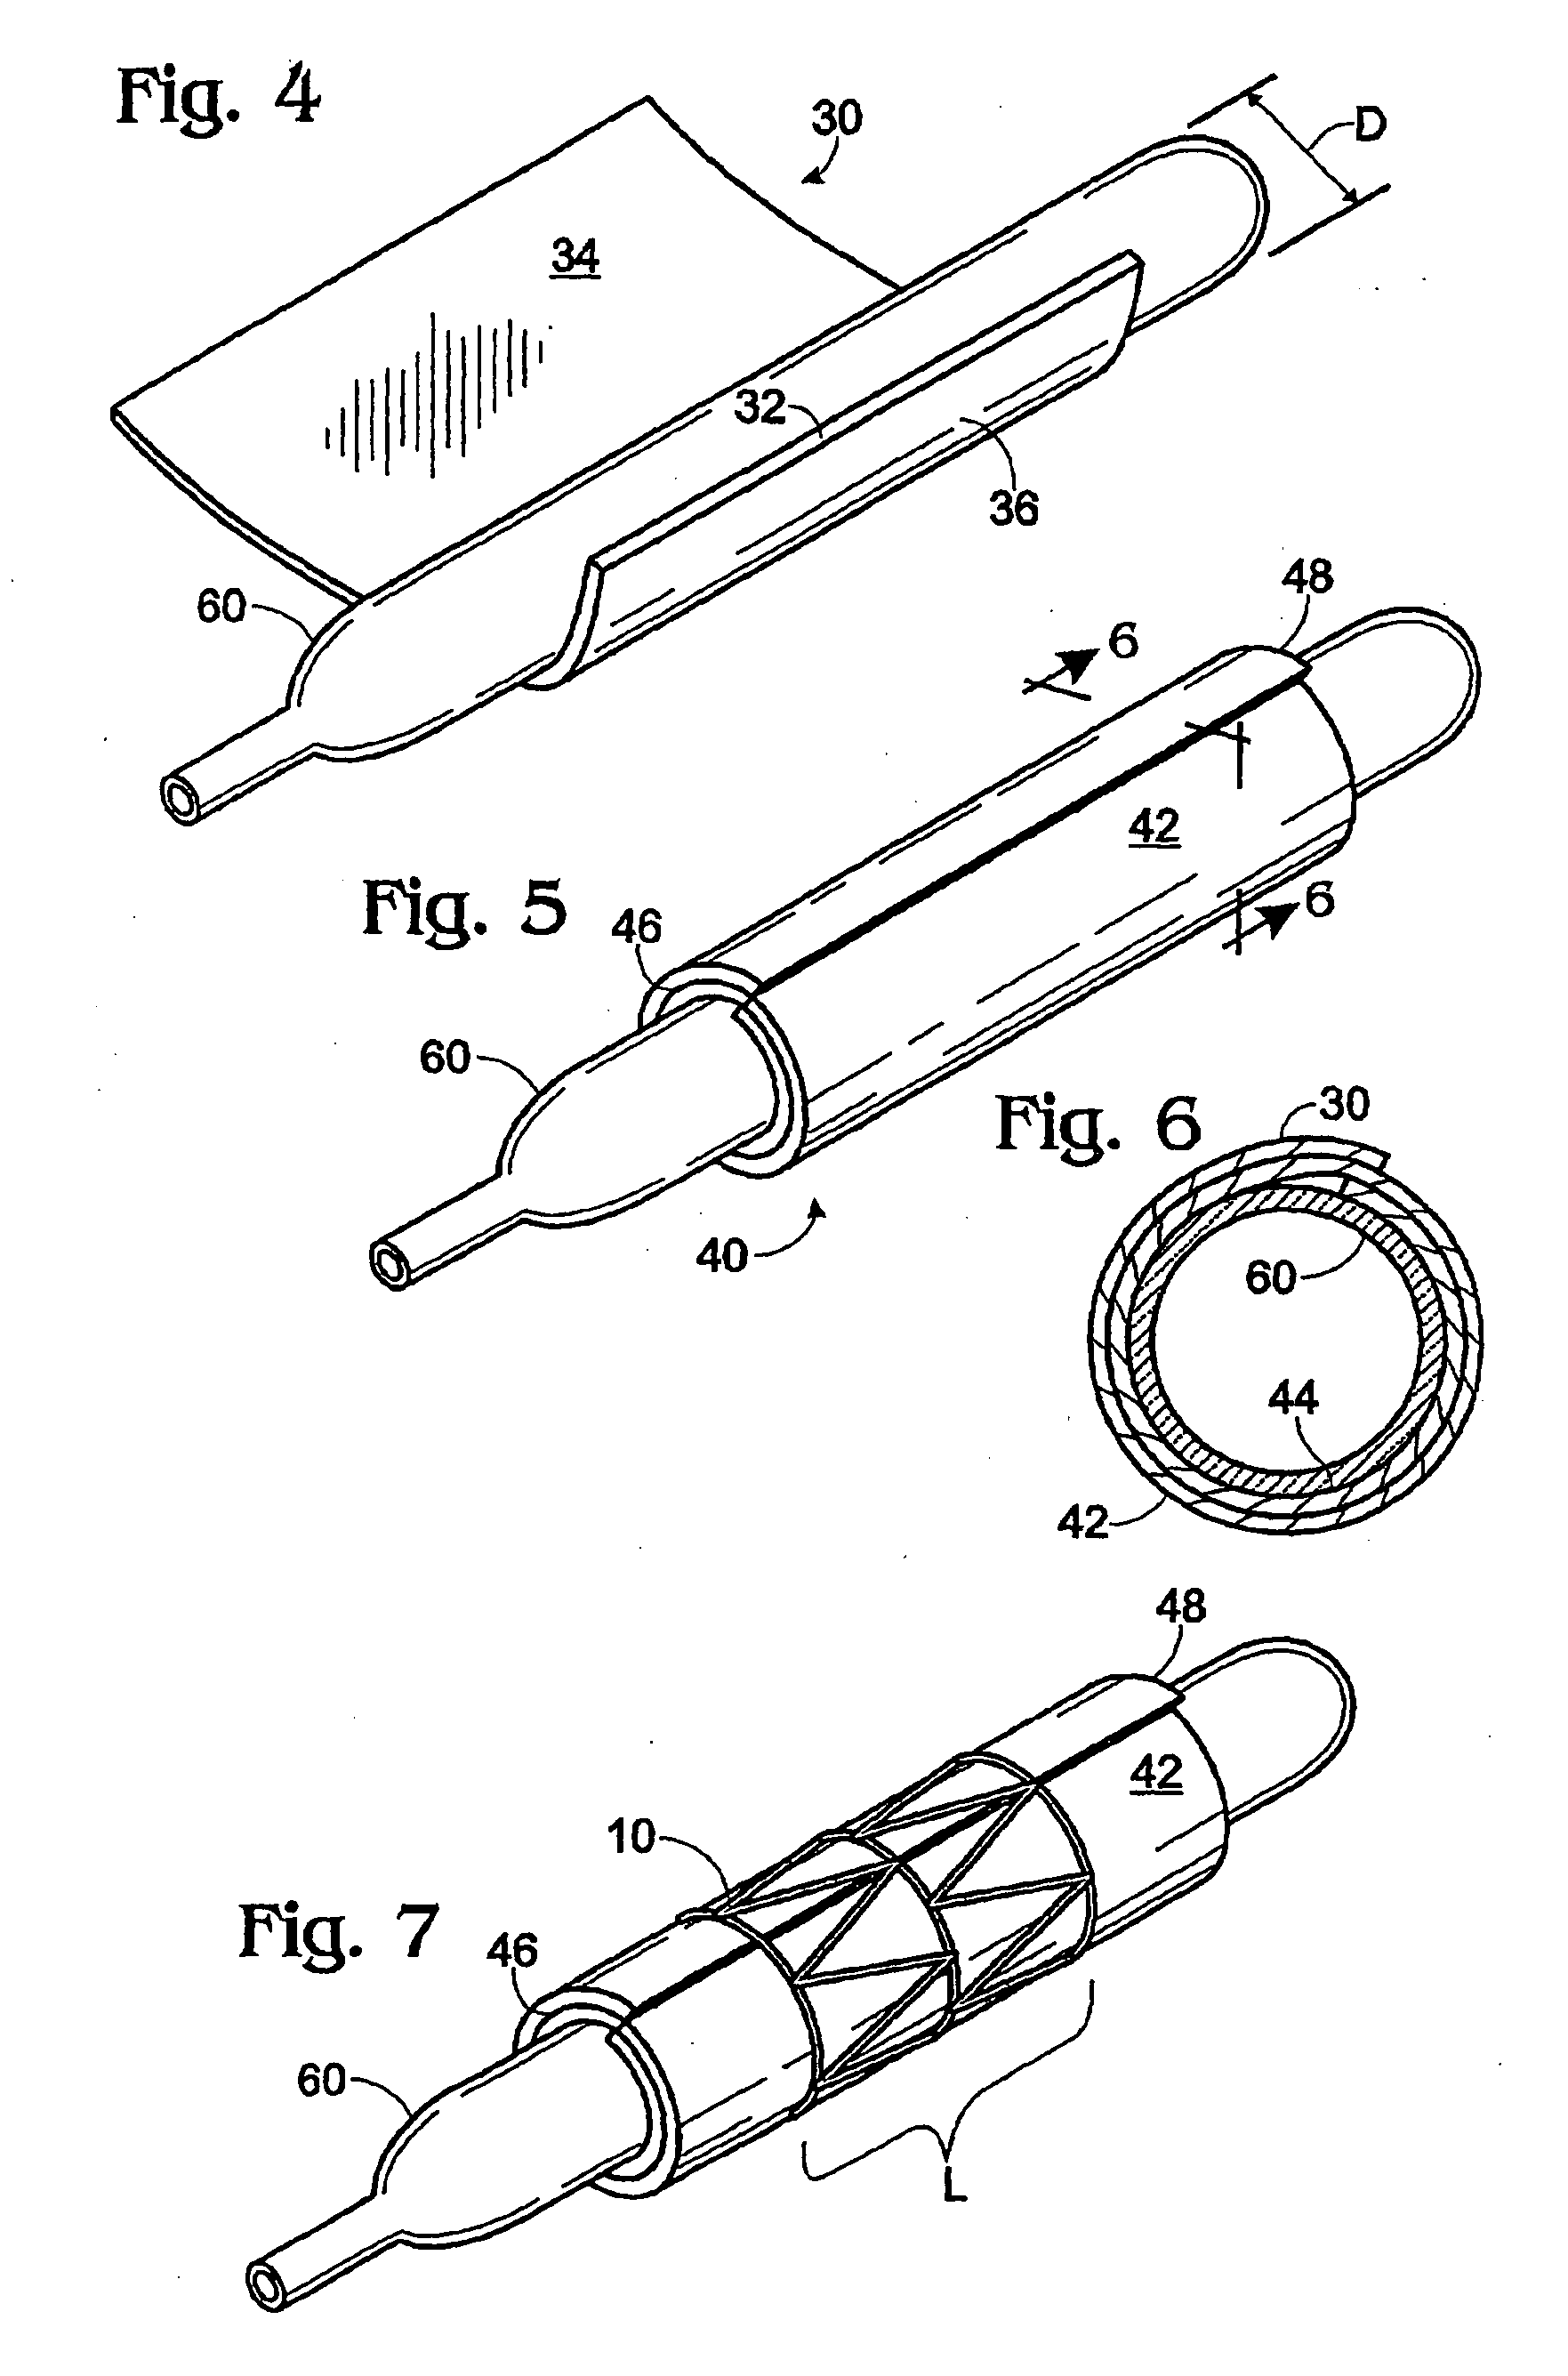 Automated manufacturing device and method for biomaterial fusion